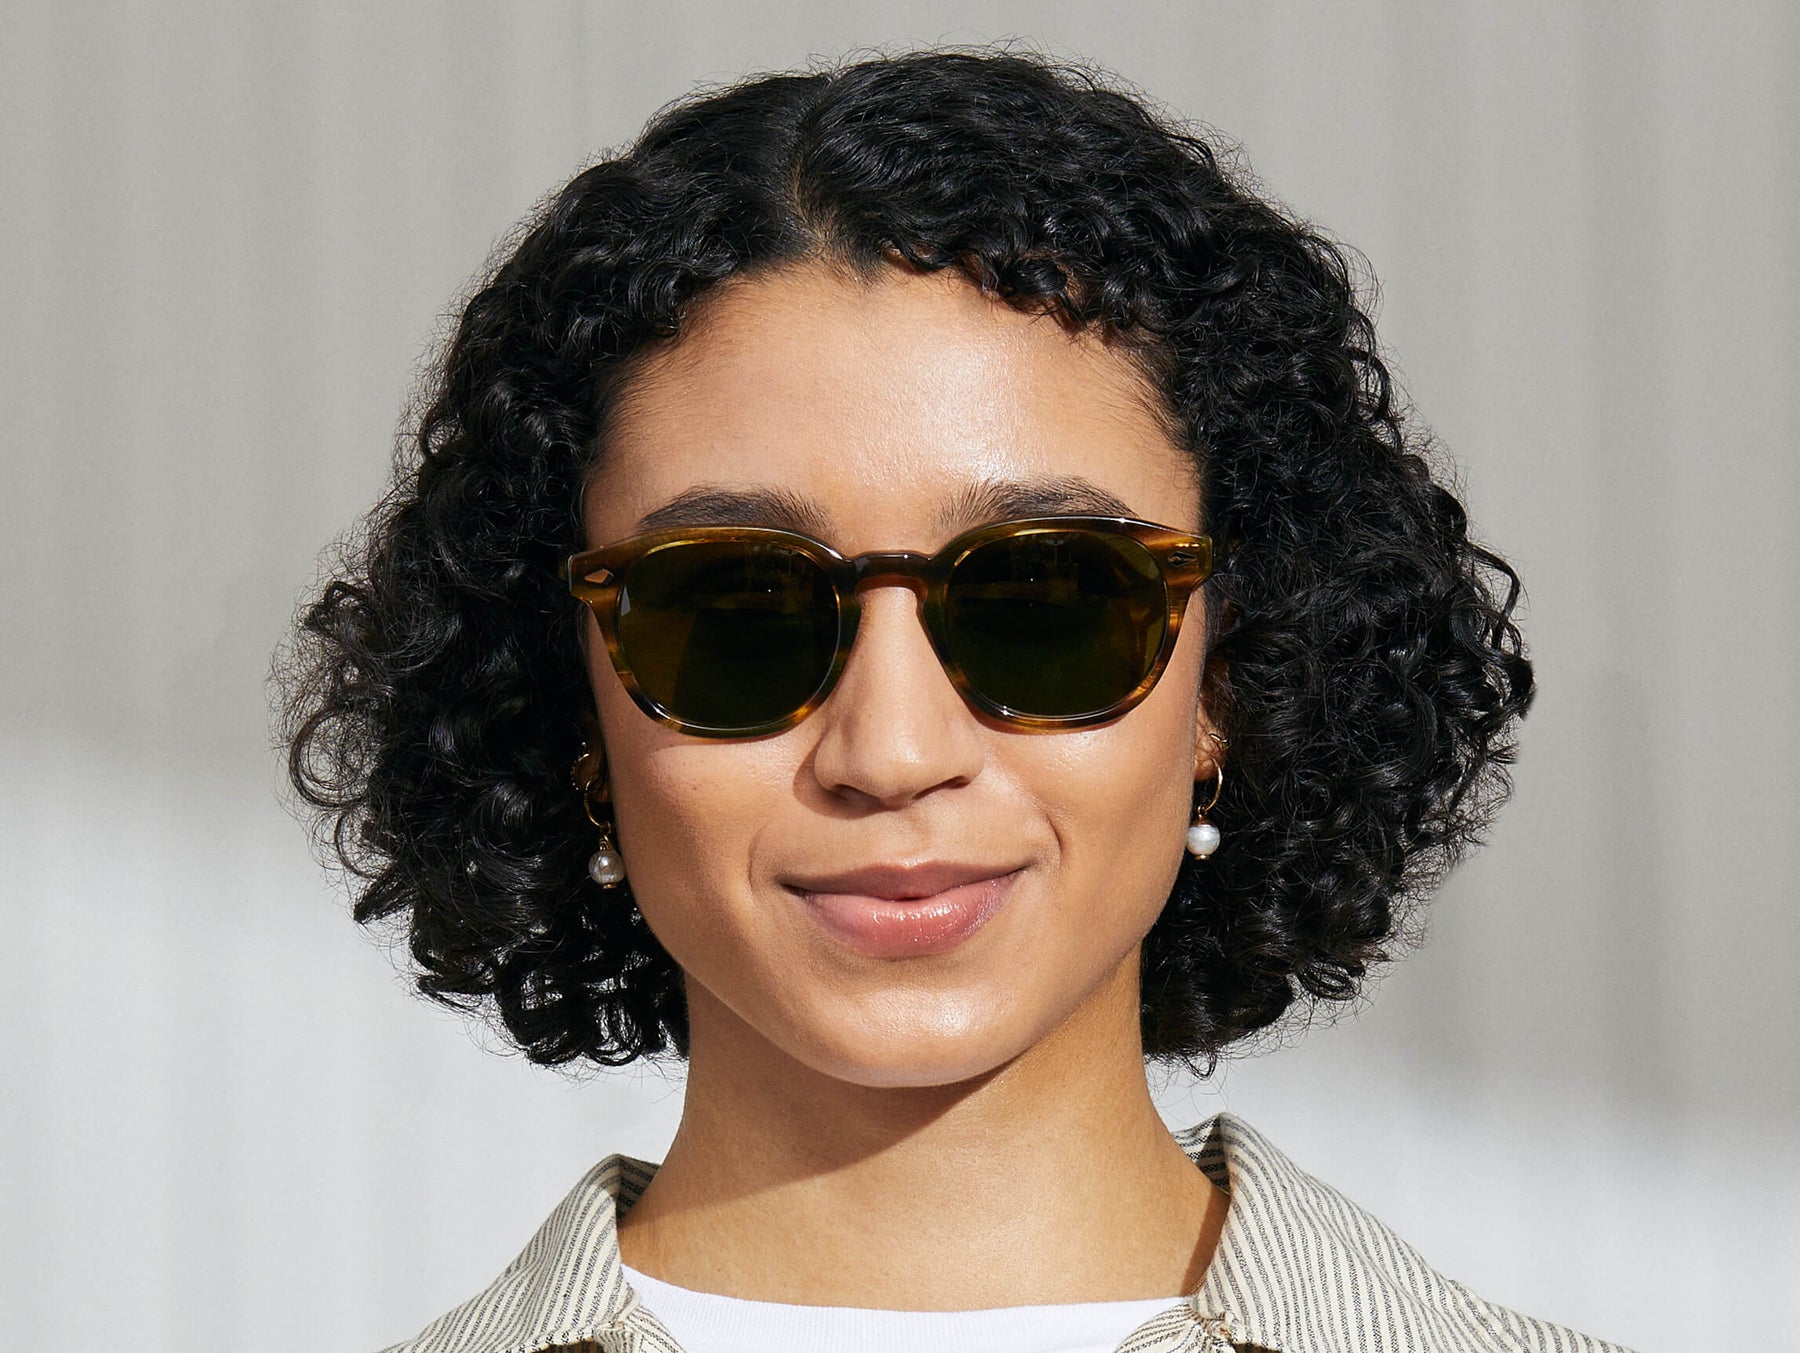 Model is wearing The LEMTOSH SUN in Bamboo in size 52 with Calibar Green Glass Lenses